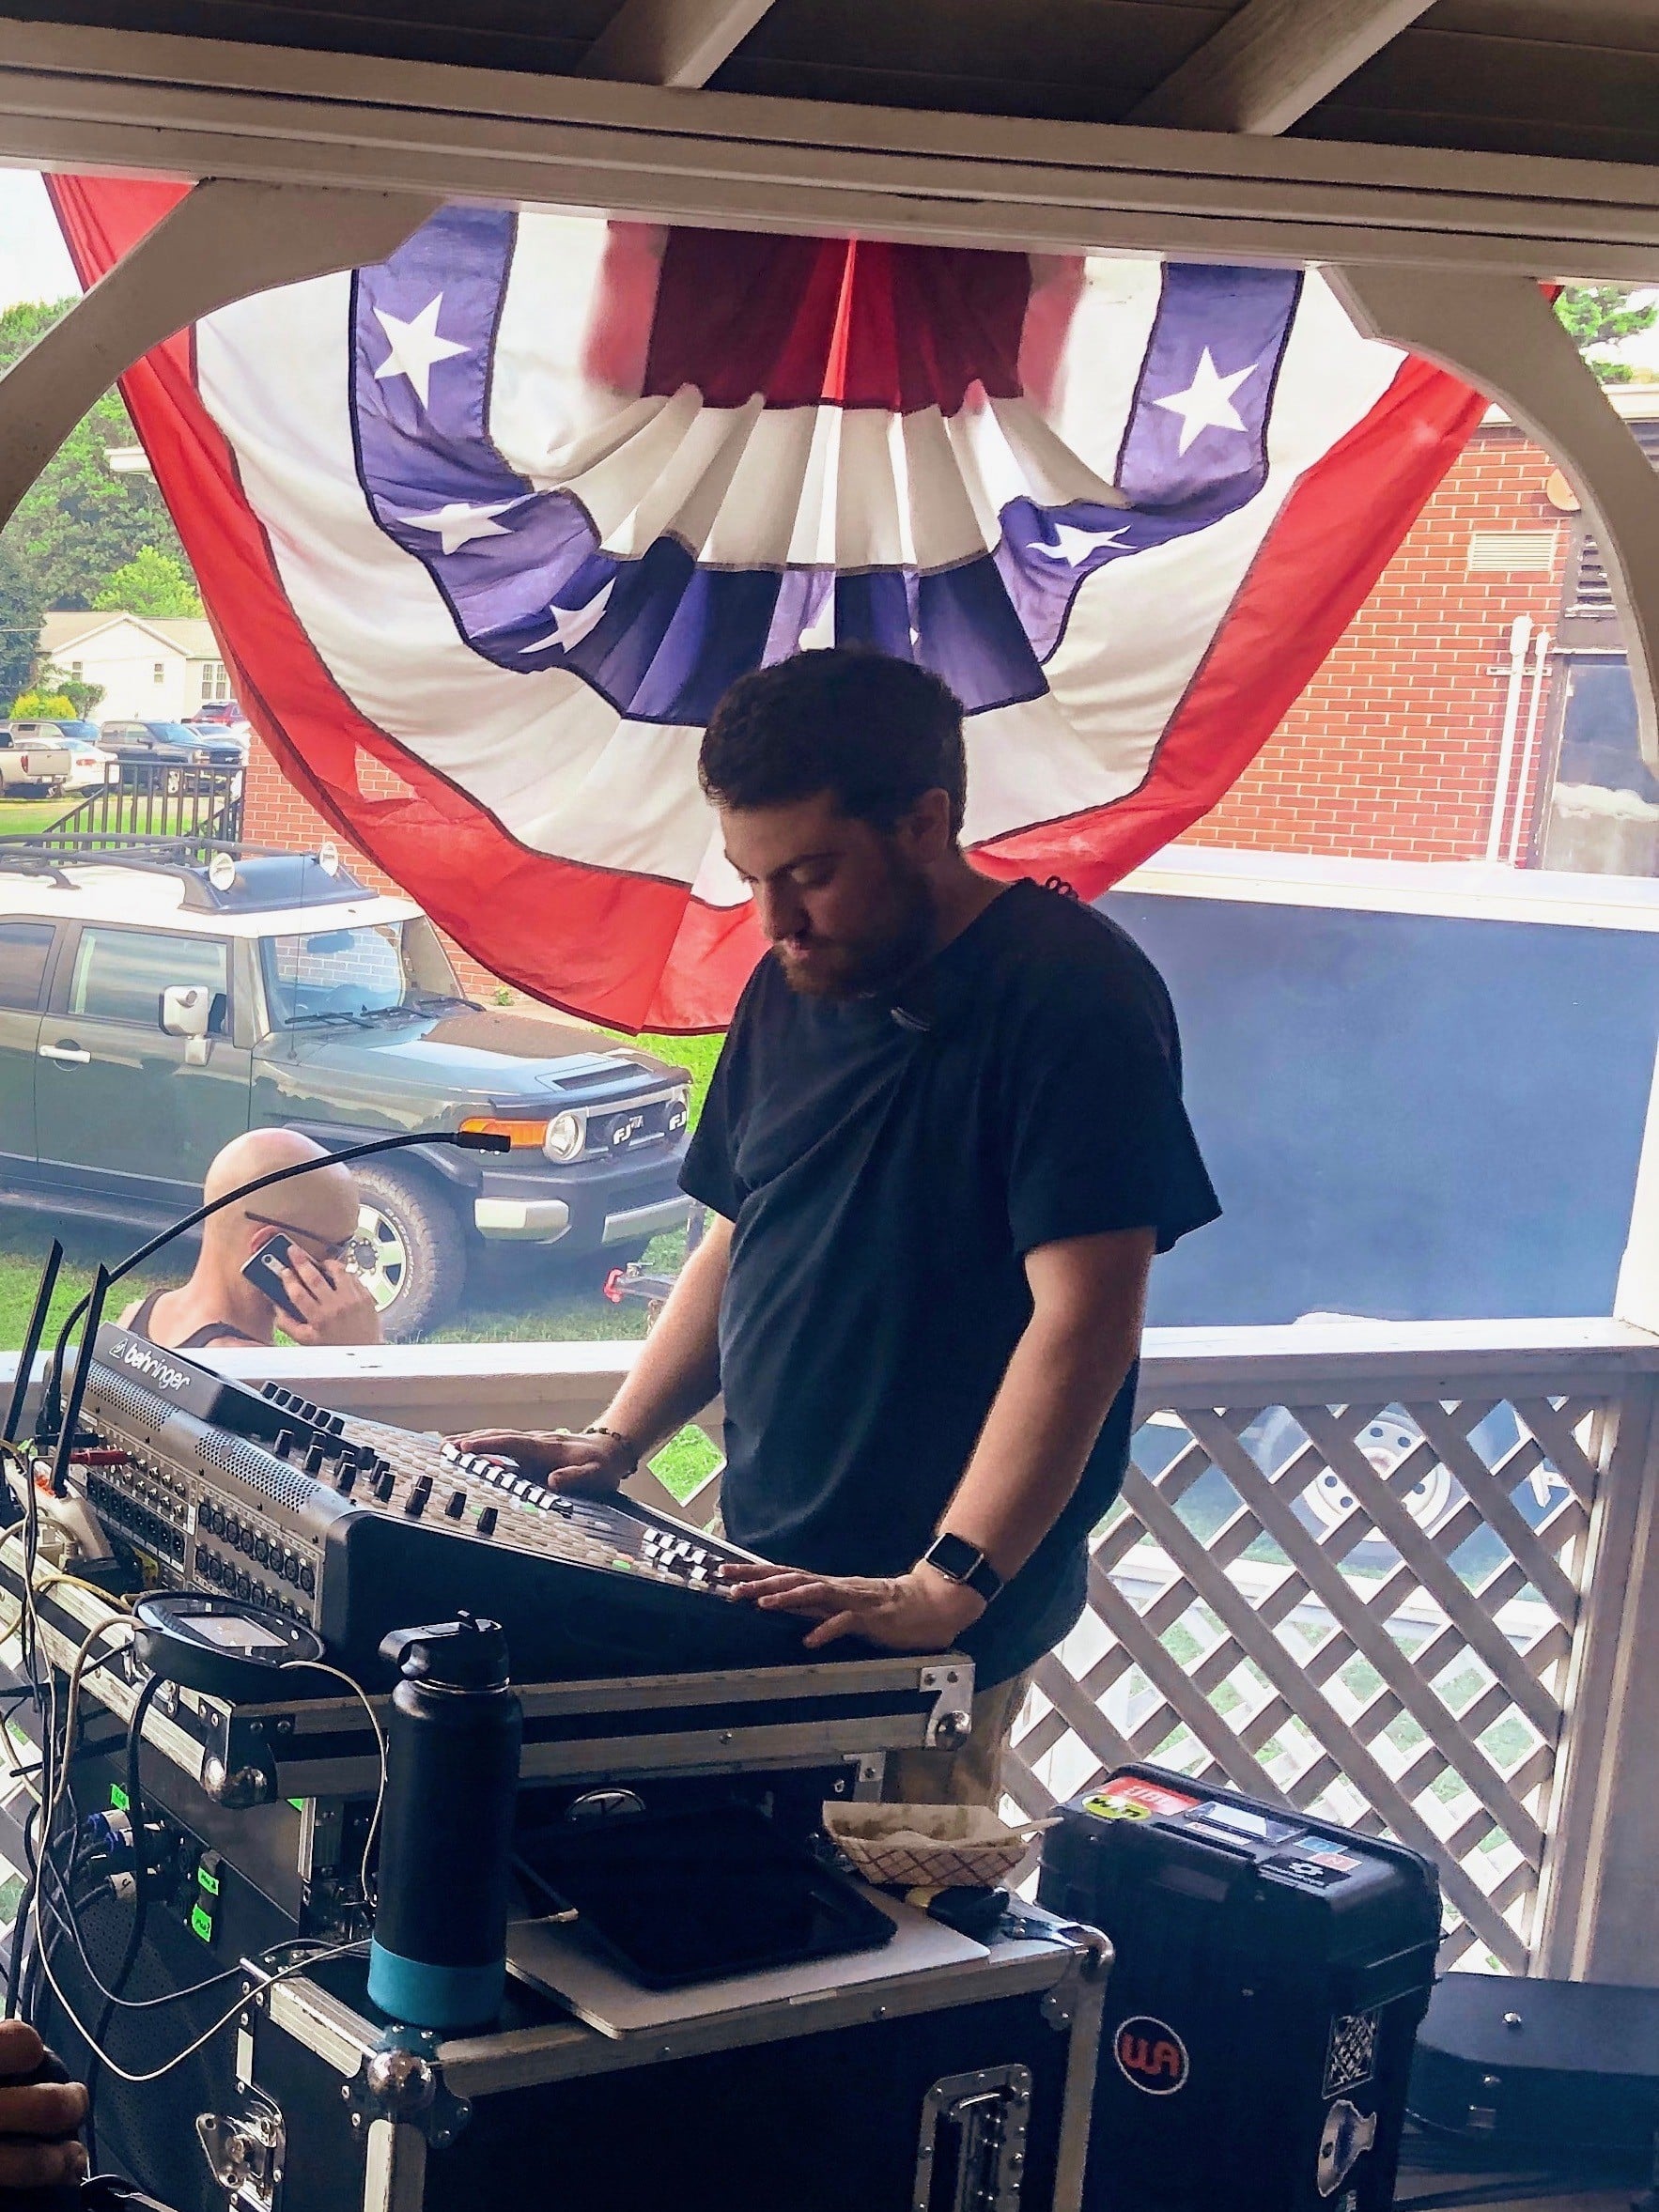 PTPA performs at Valley Day in 2019 where Matt worked as the technical director.